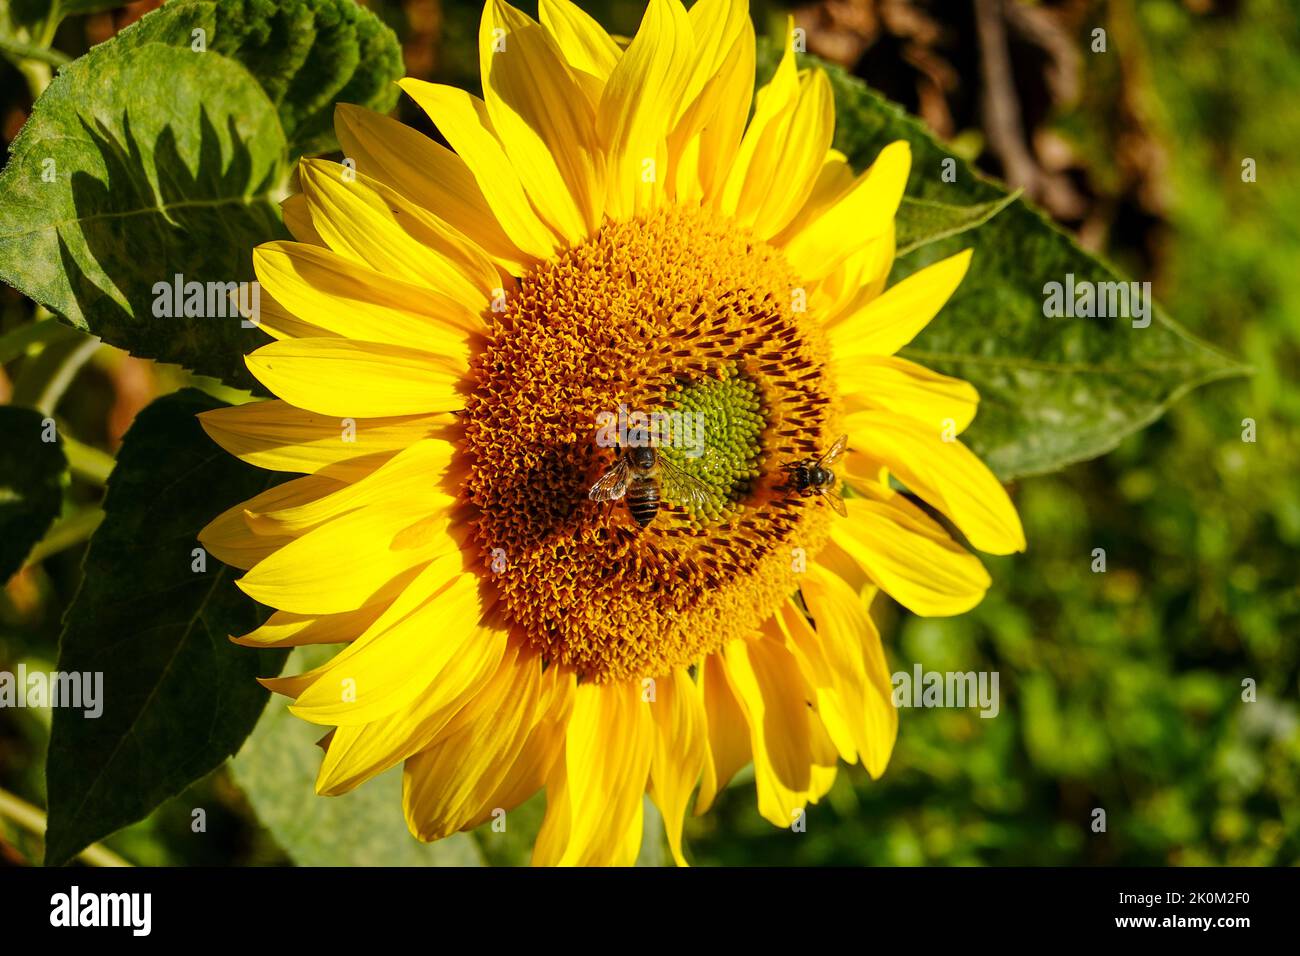 California sunflower, growing in France, with two bees gathering pollen from its center. Stock Photo